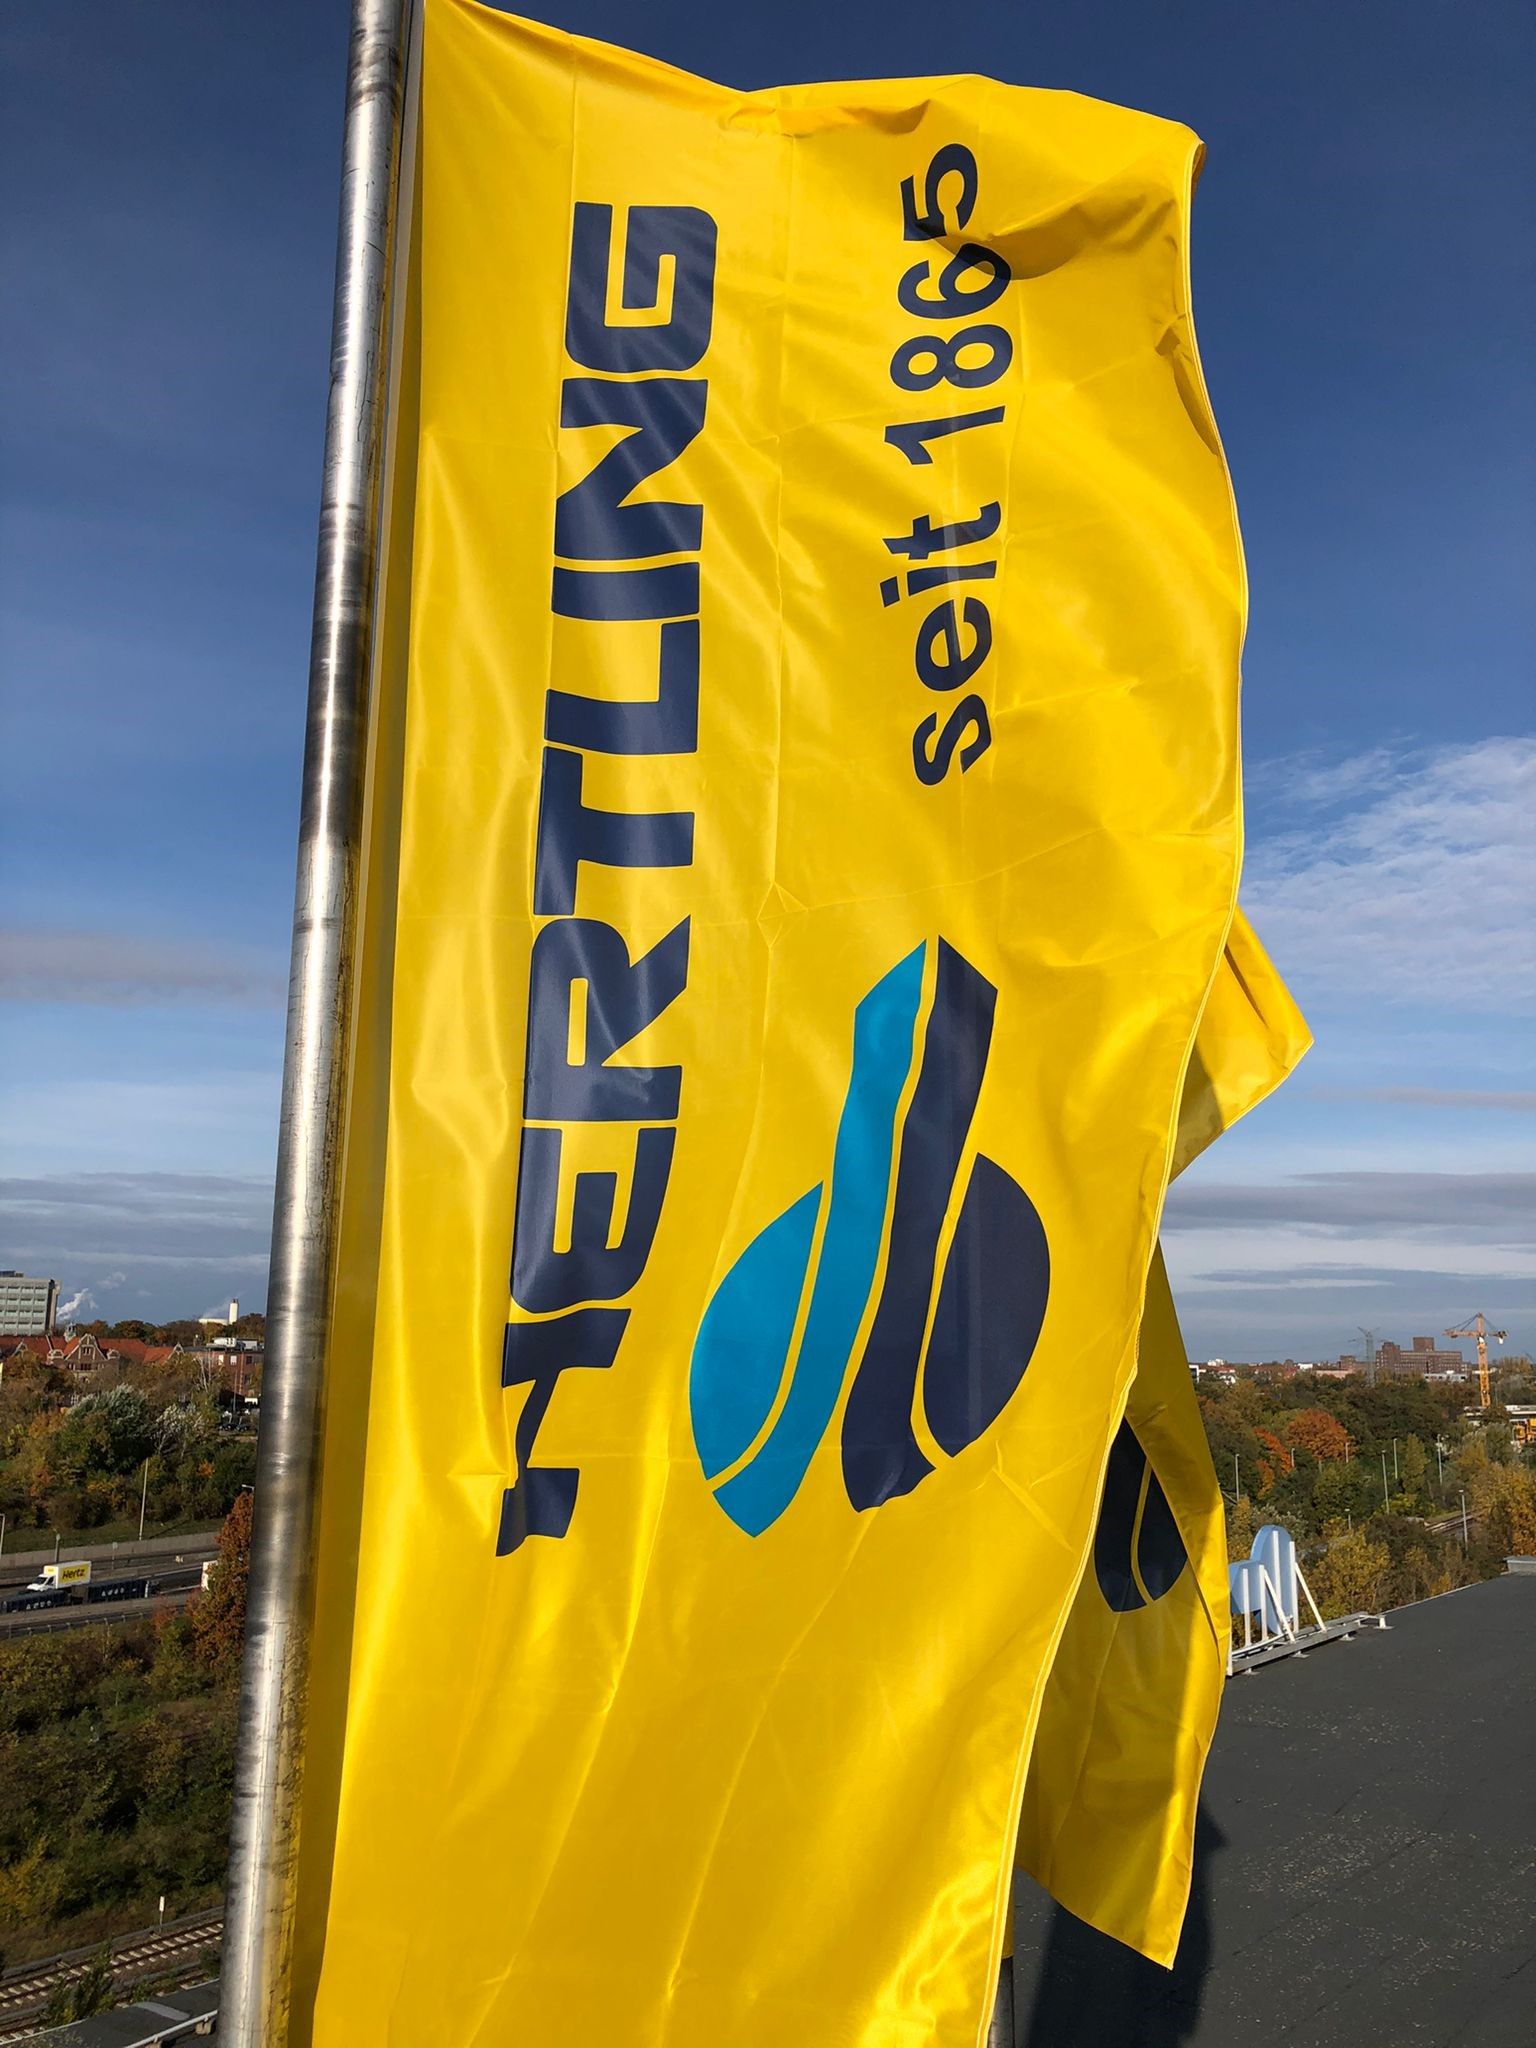 Our new HERTLING flags are fluttering again on our flagpoles on the roof of the HERTLING headquarters!